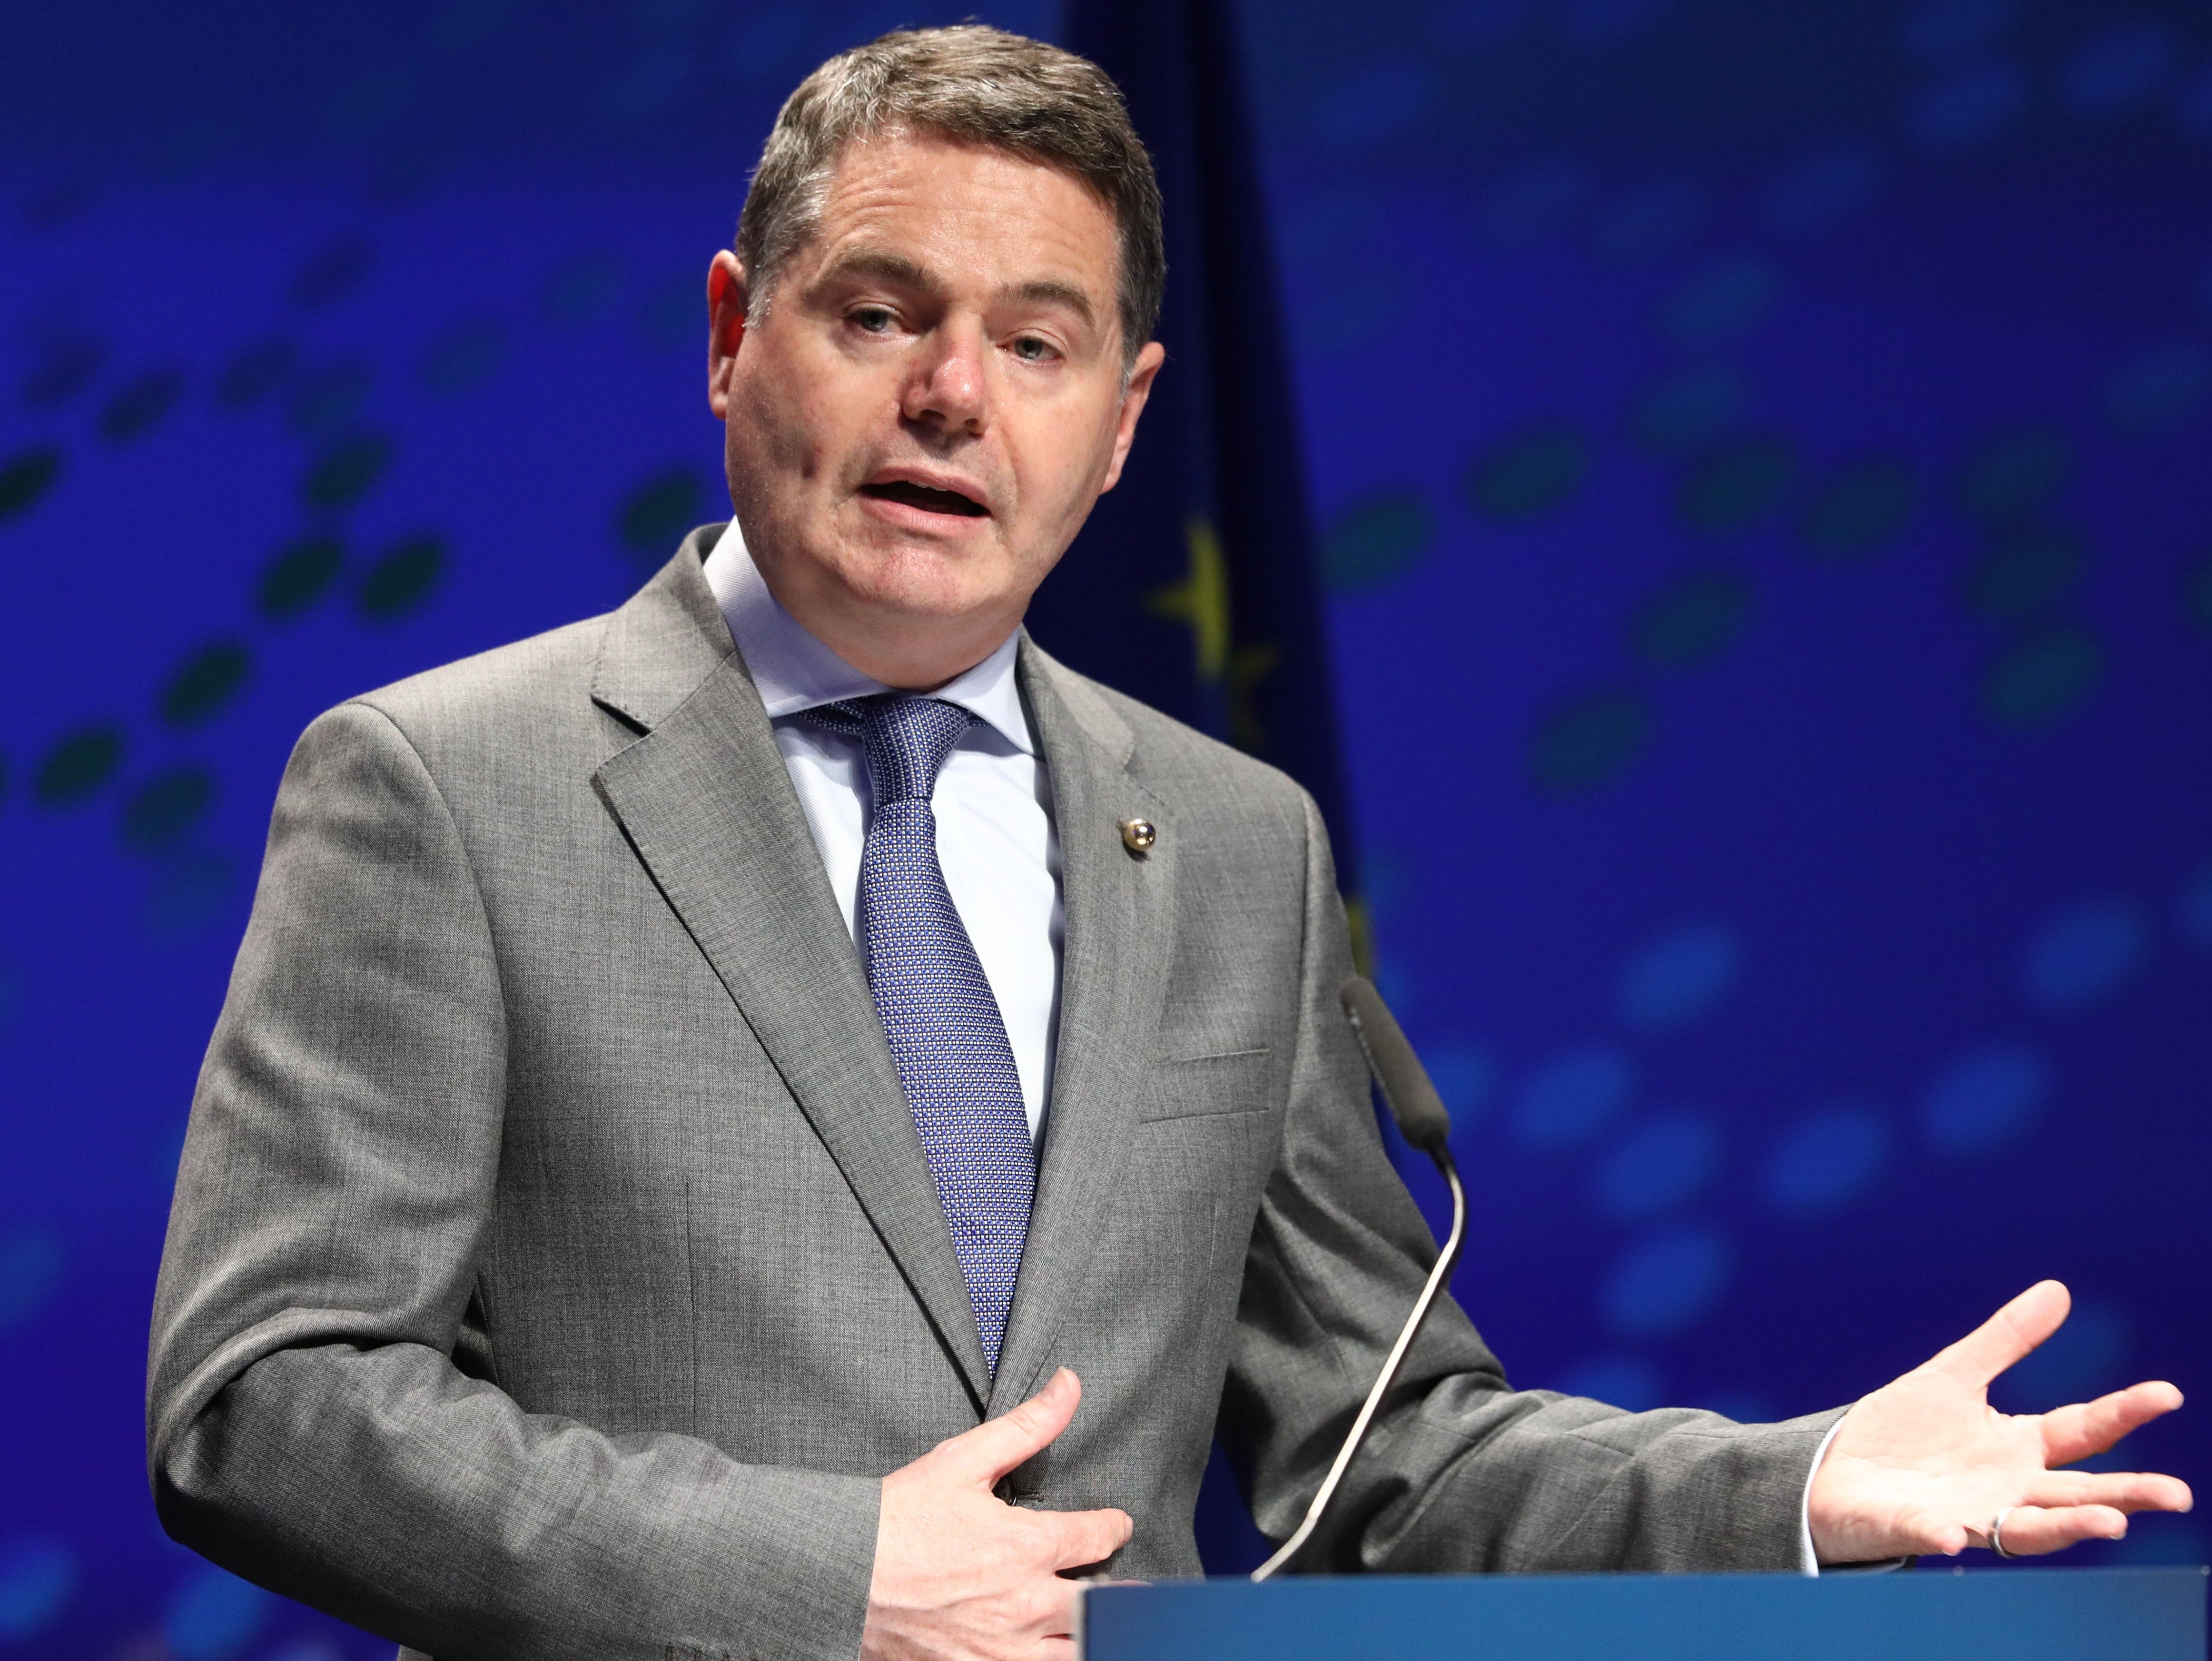 The Irish finance minister Paschal Donohoe has reiterated Dublin’s resistance to any minimum corporation tax rate